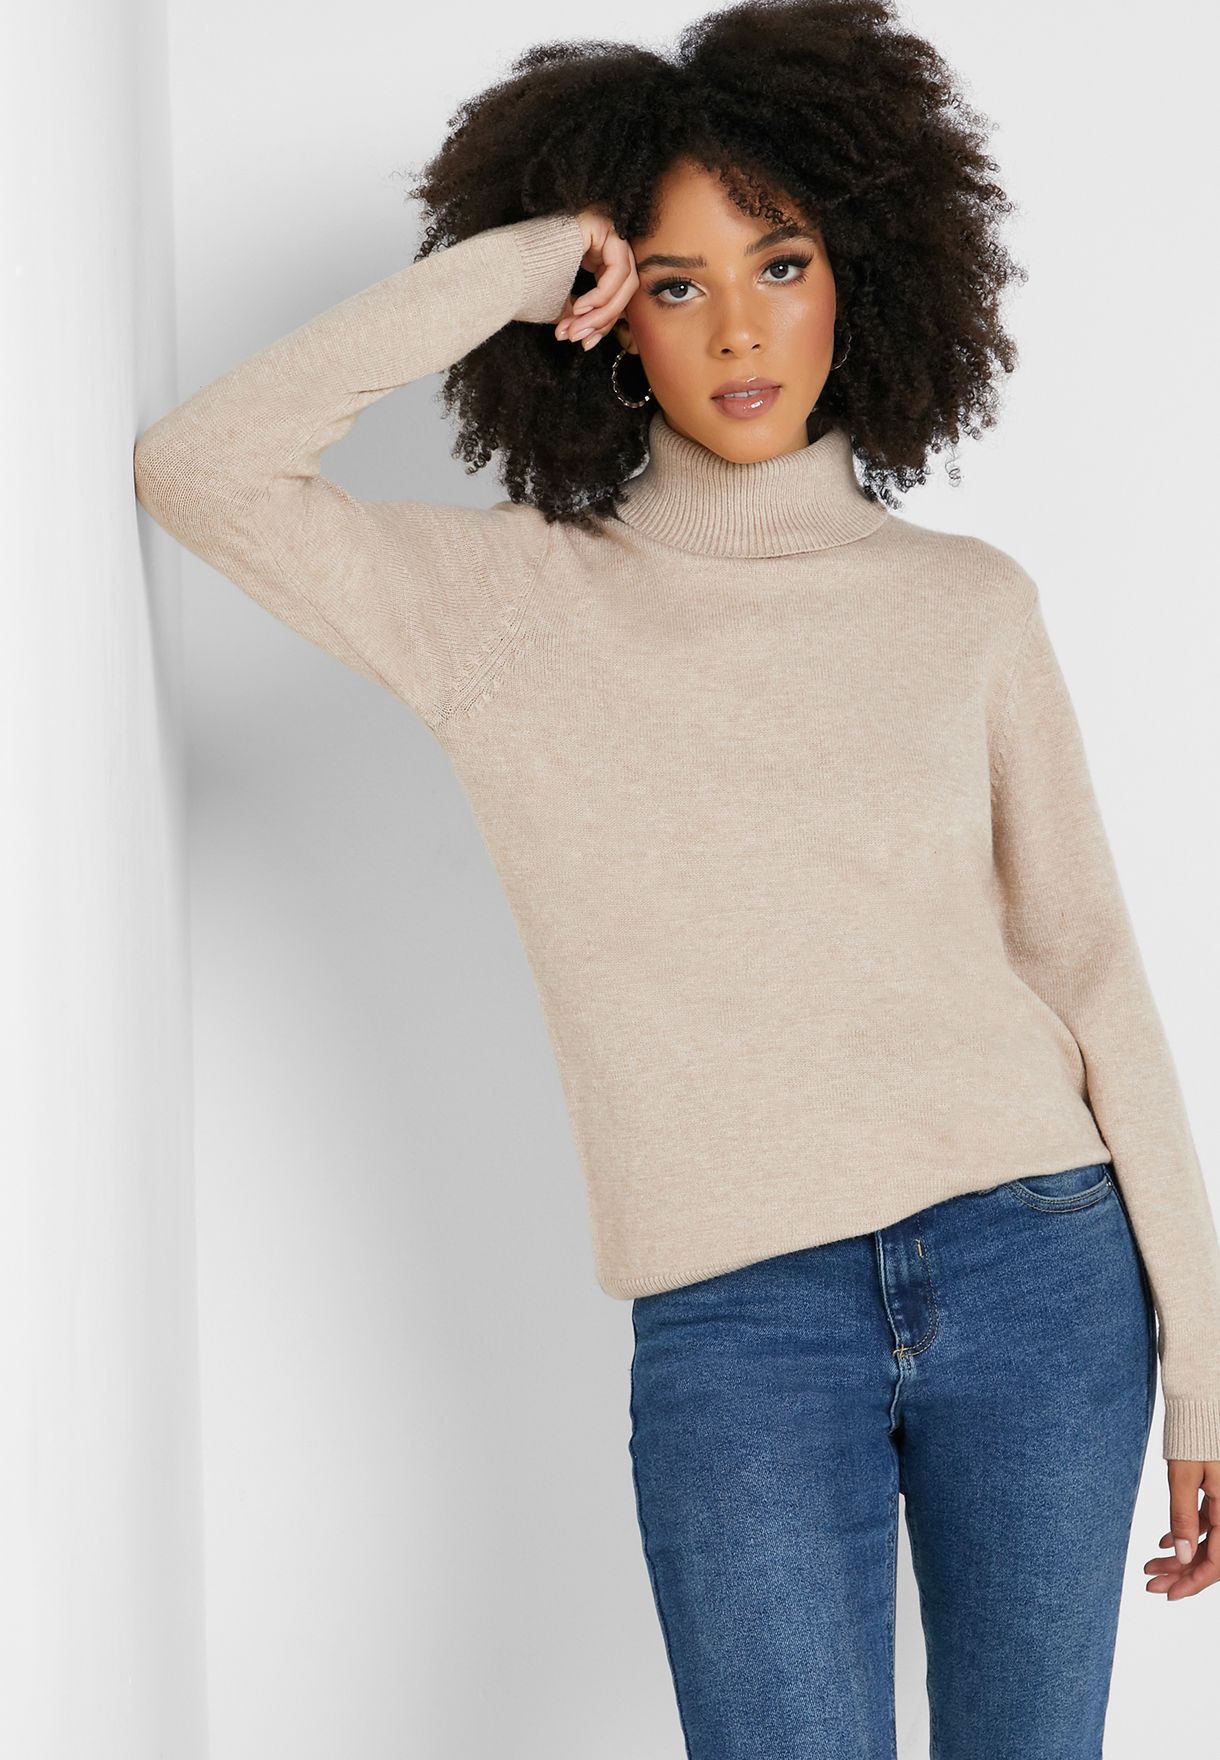 Buy Jacqueline De Yong High Neck Sweater for in Worldwide - 15189025